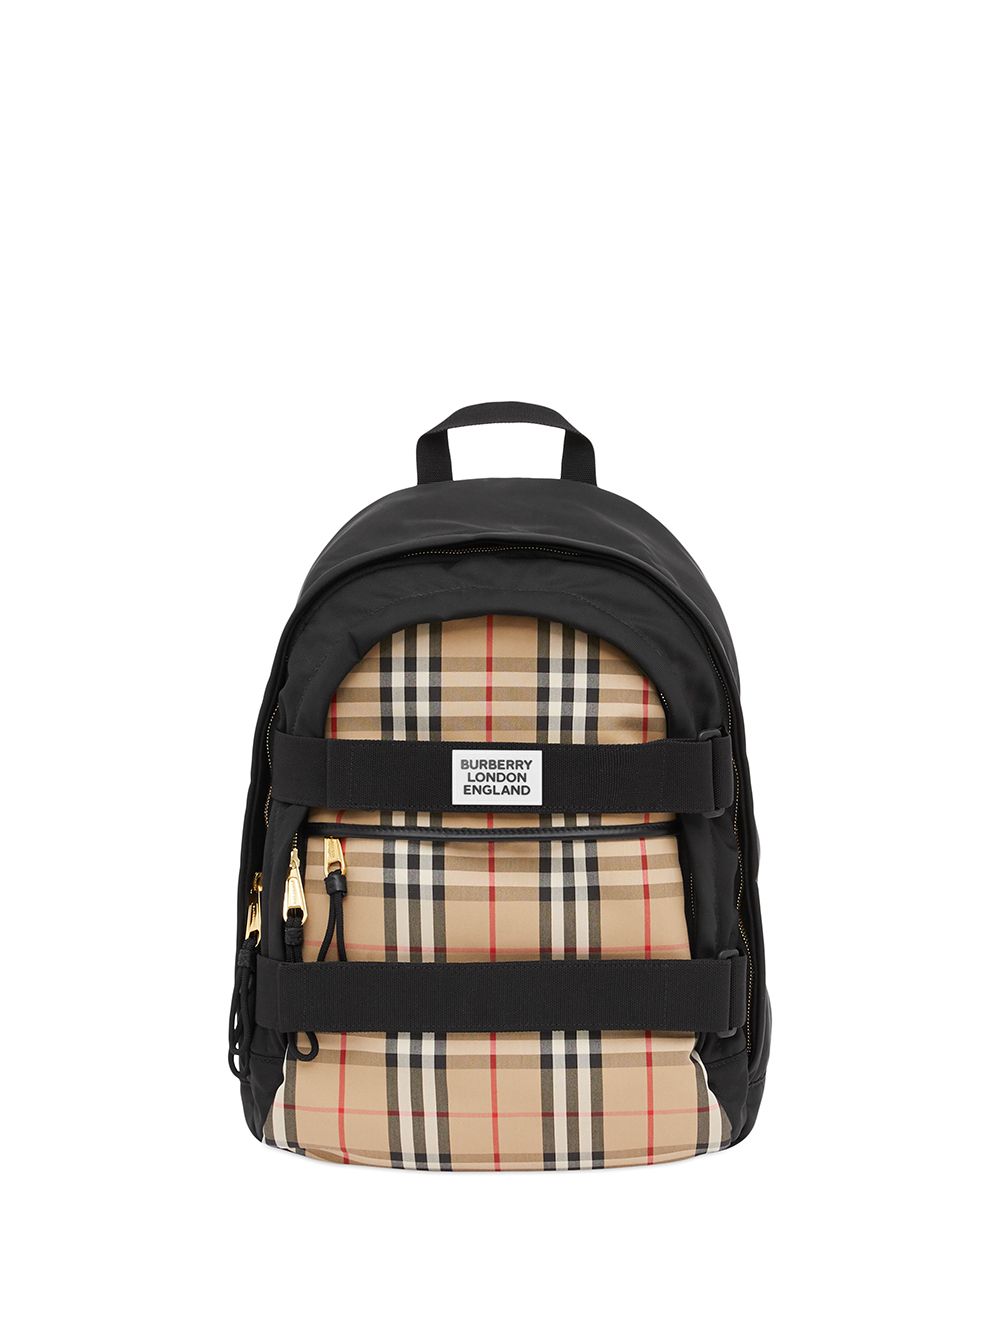 burberry vintage check backpack